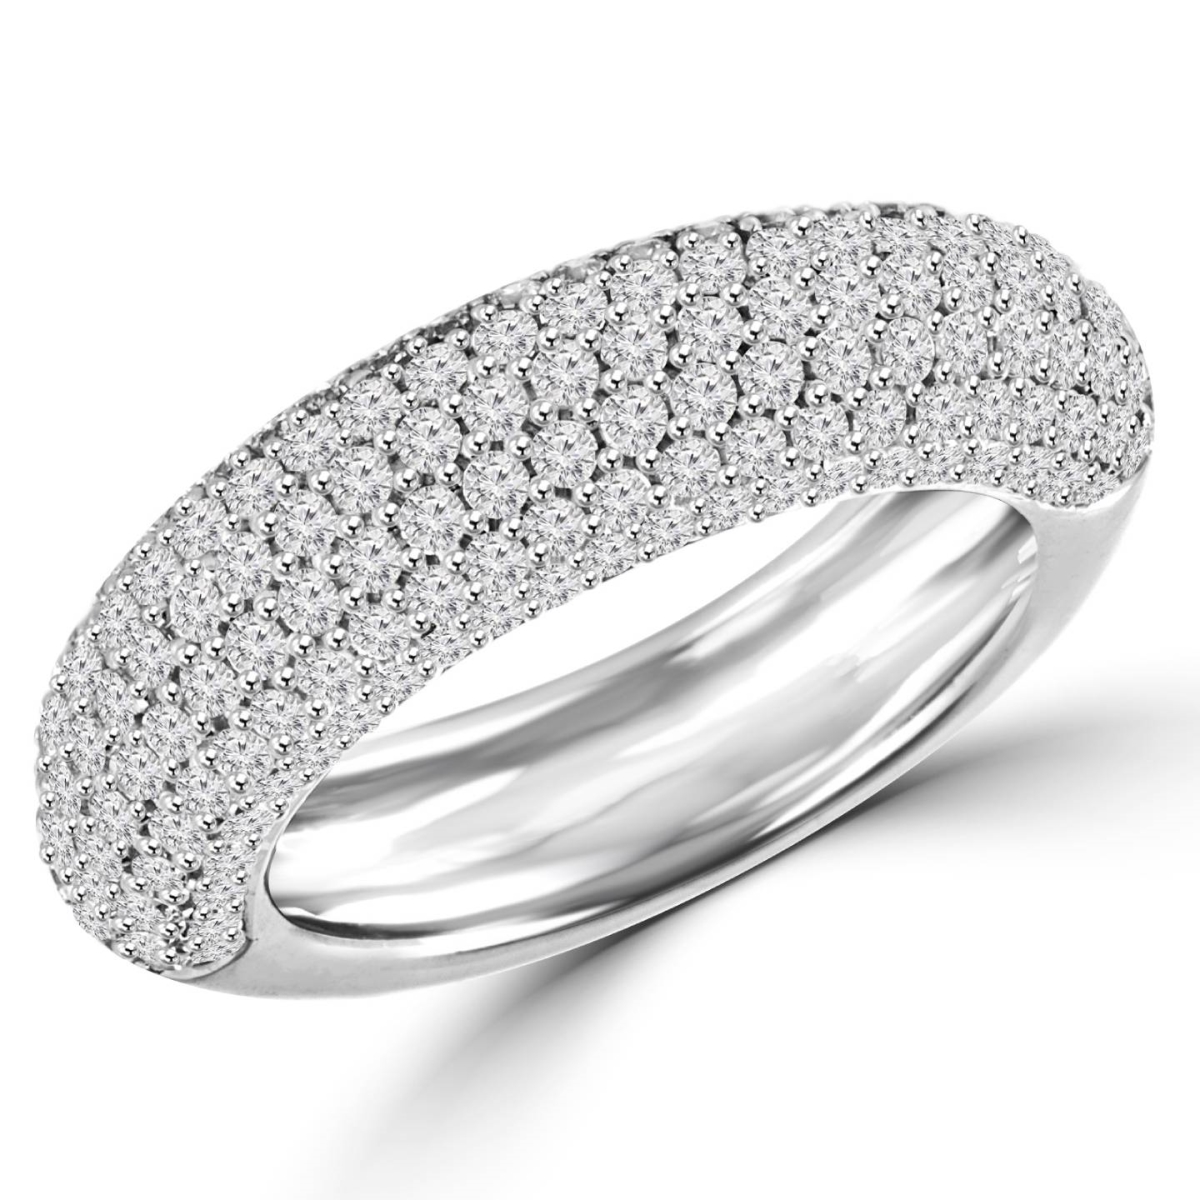 1.5 CTW Pave Set Round Diamond Anniversary Wedding Band Ring in 14K White Gold - Size 3.75 -  Great Gems, GR3056325